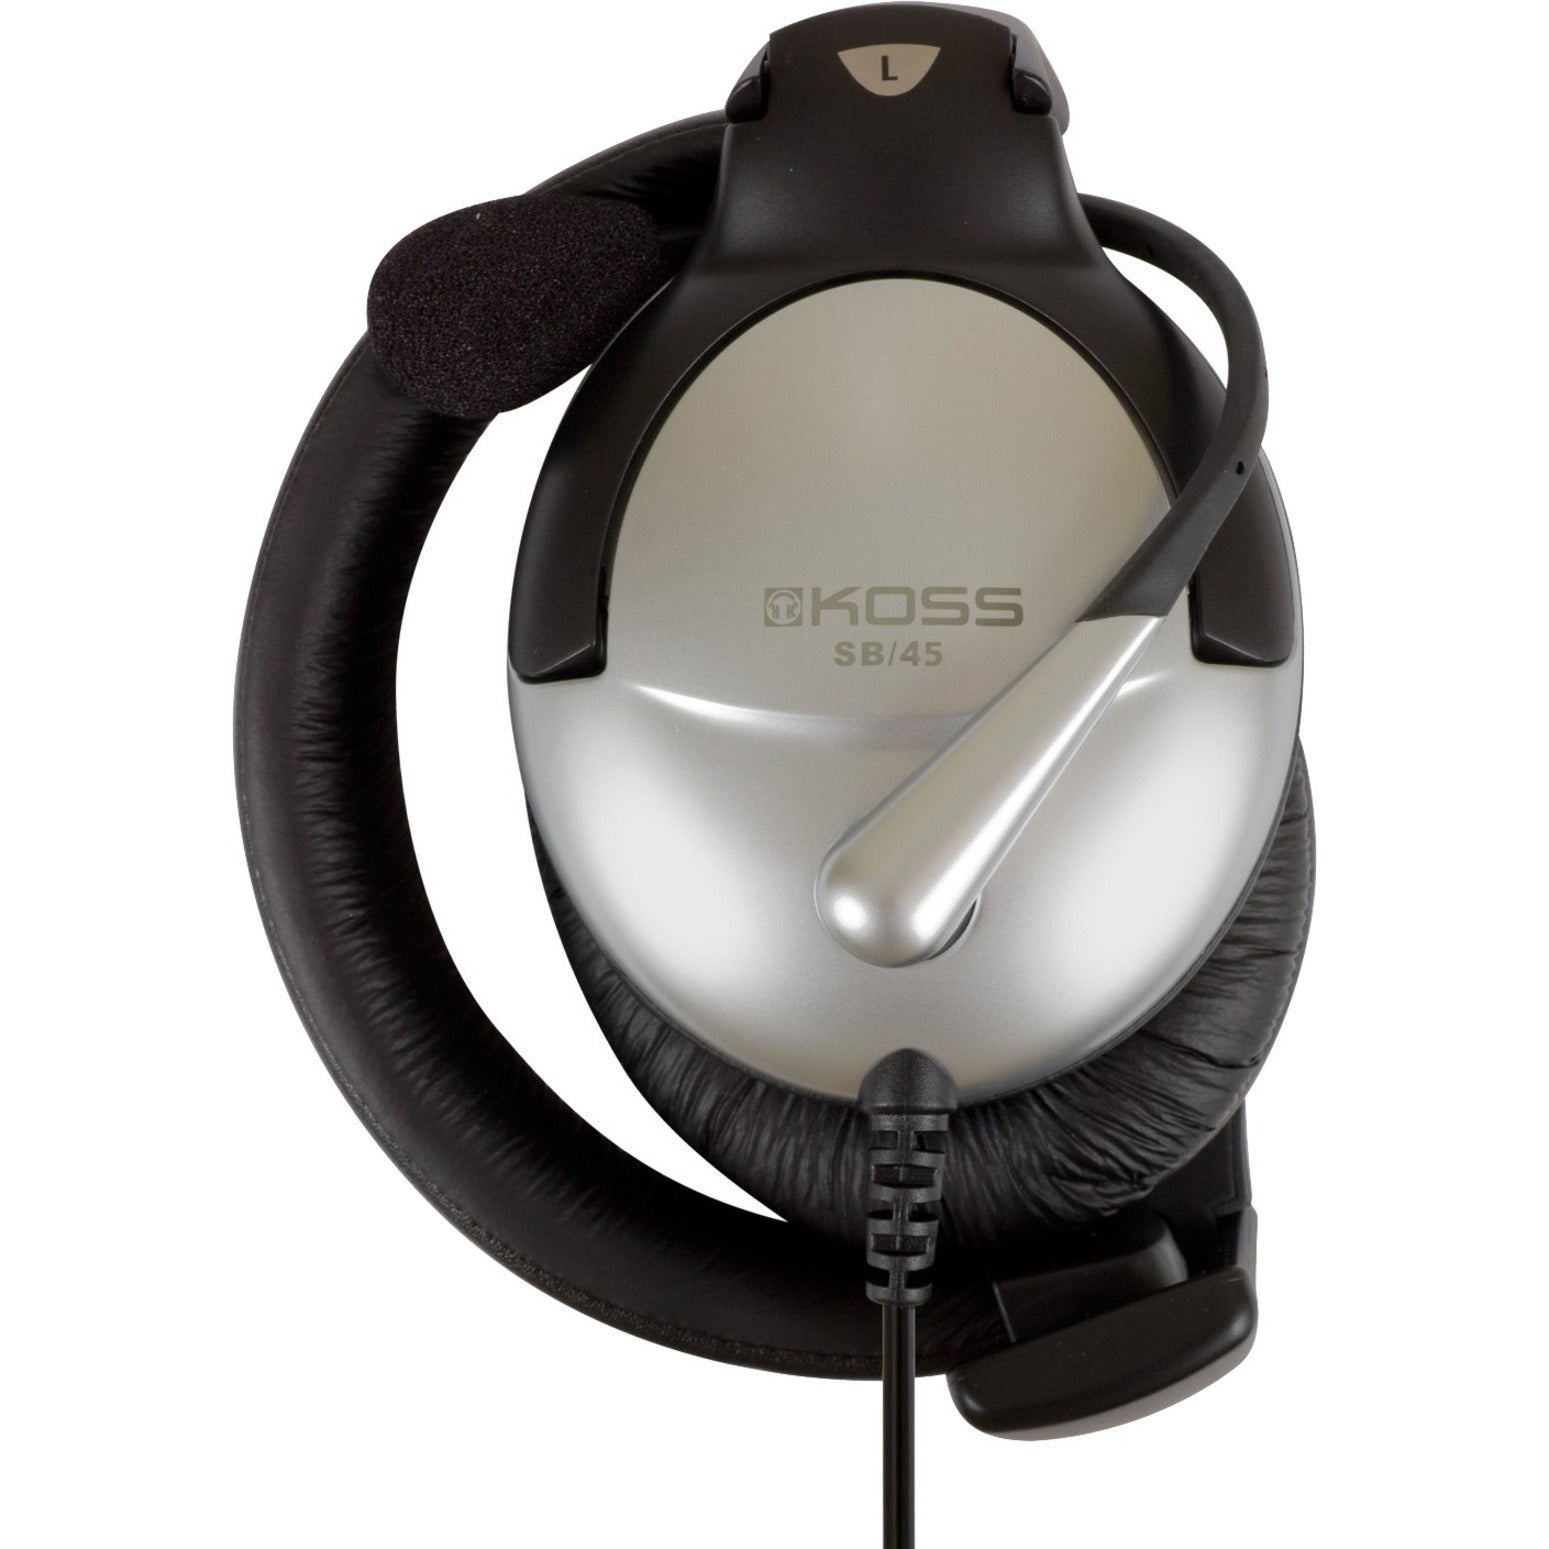 Koss SB45 USB Communication Headsets, Over-the-head Binaural Headset with Boom Microphone, Collapsible, Noise Reduction